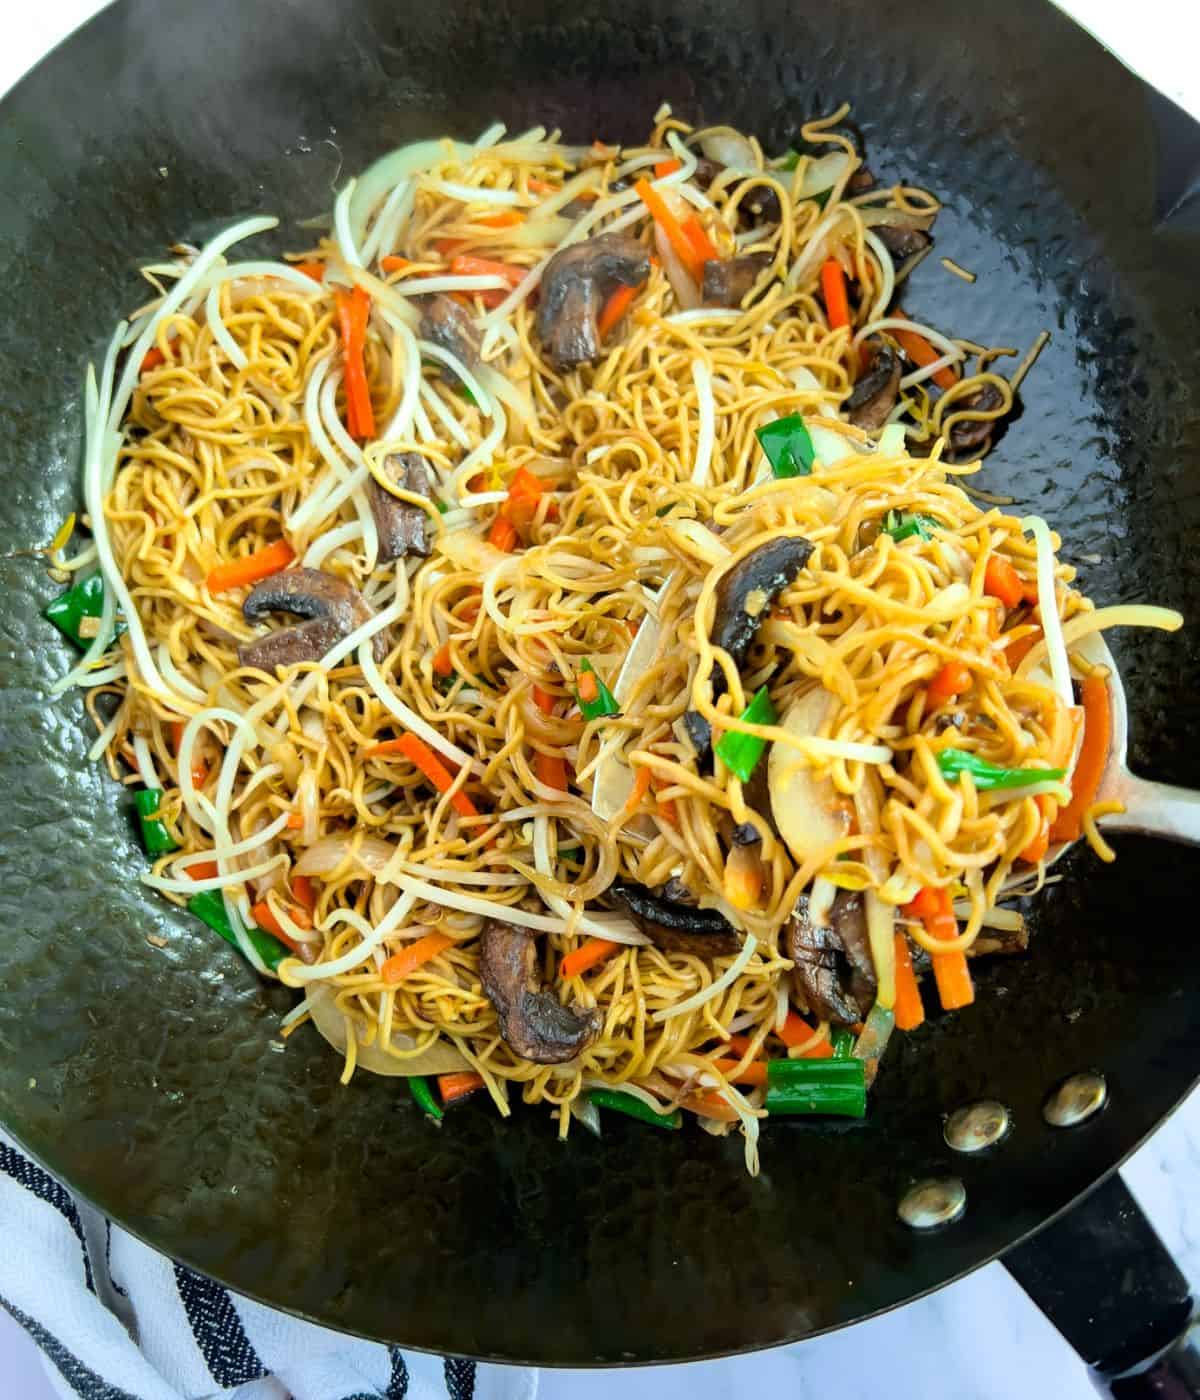 Finish cantonese chow mein noodles in a wok.